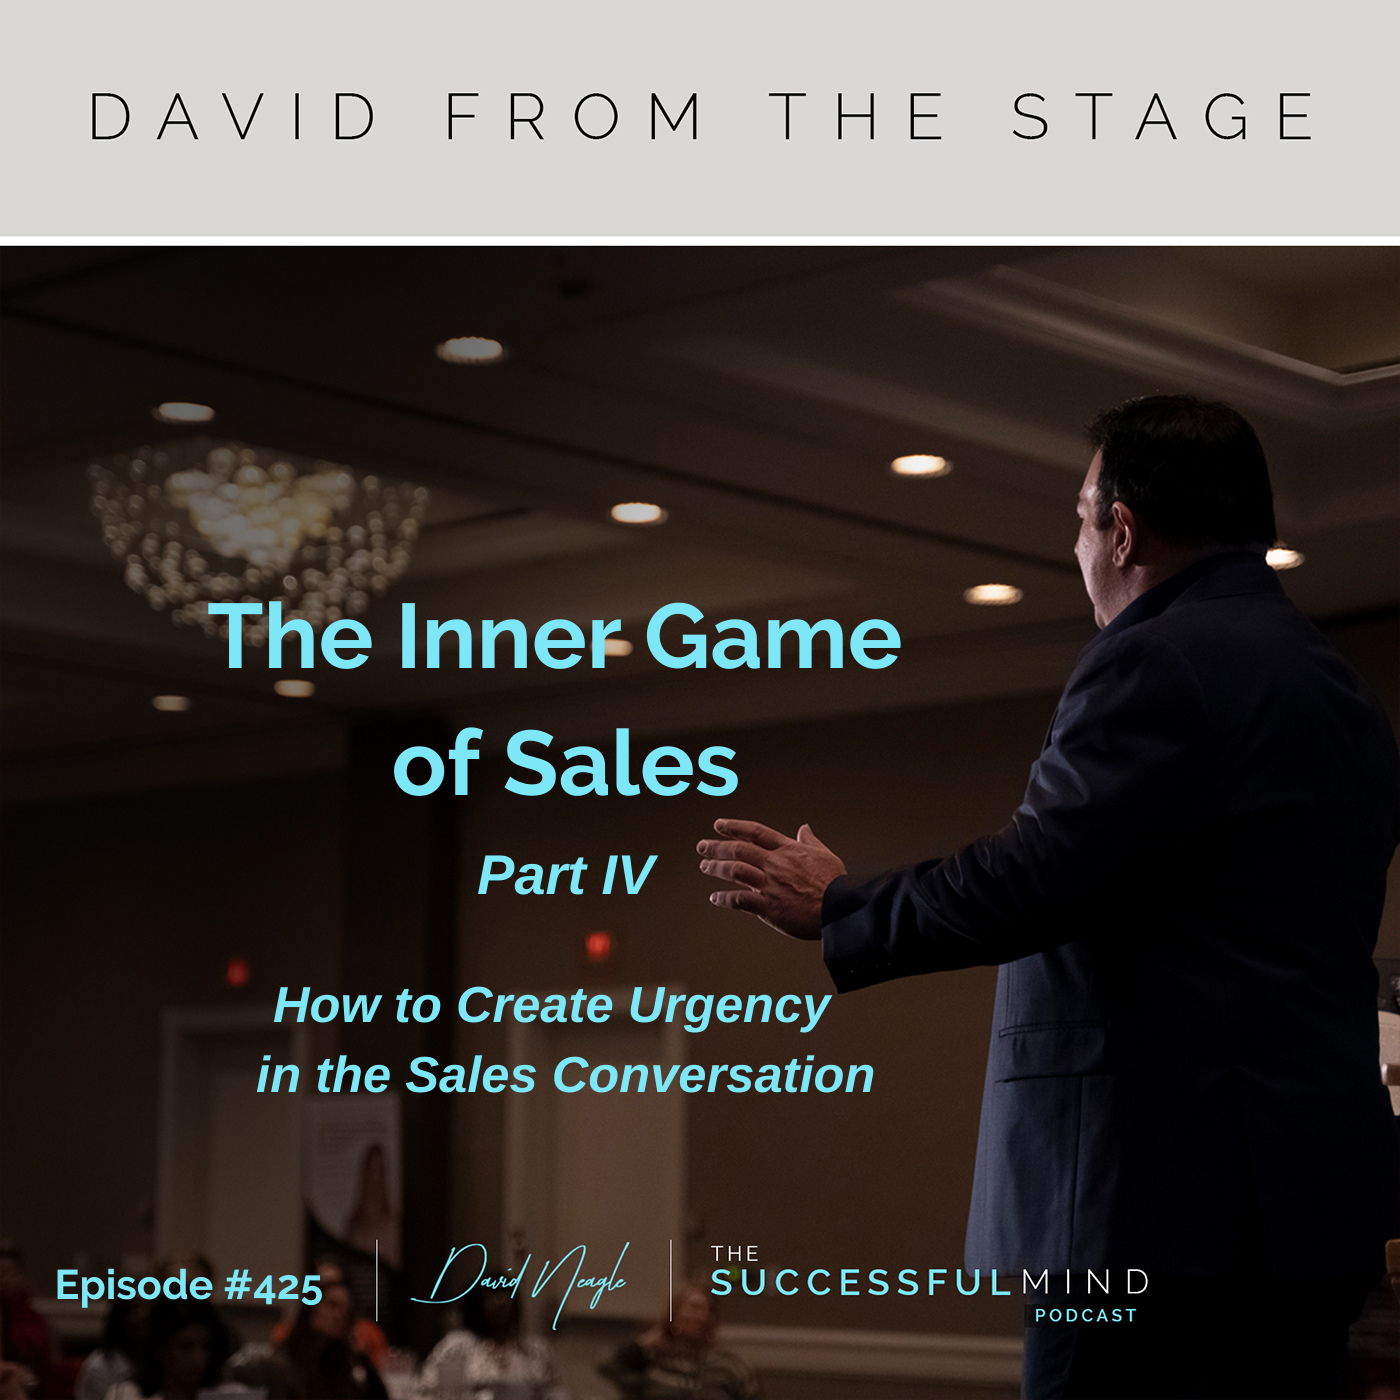 The Successful Mind Podcast - Episode 425 - The Inner Game of Sales - Part IV